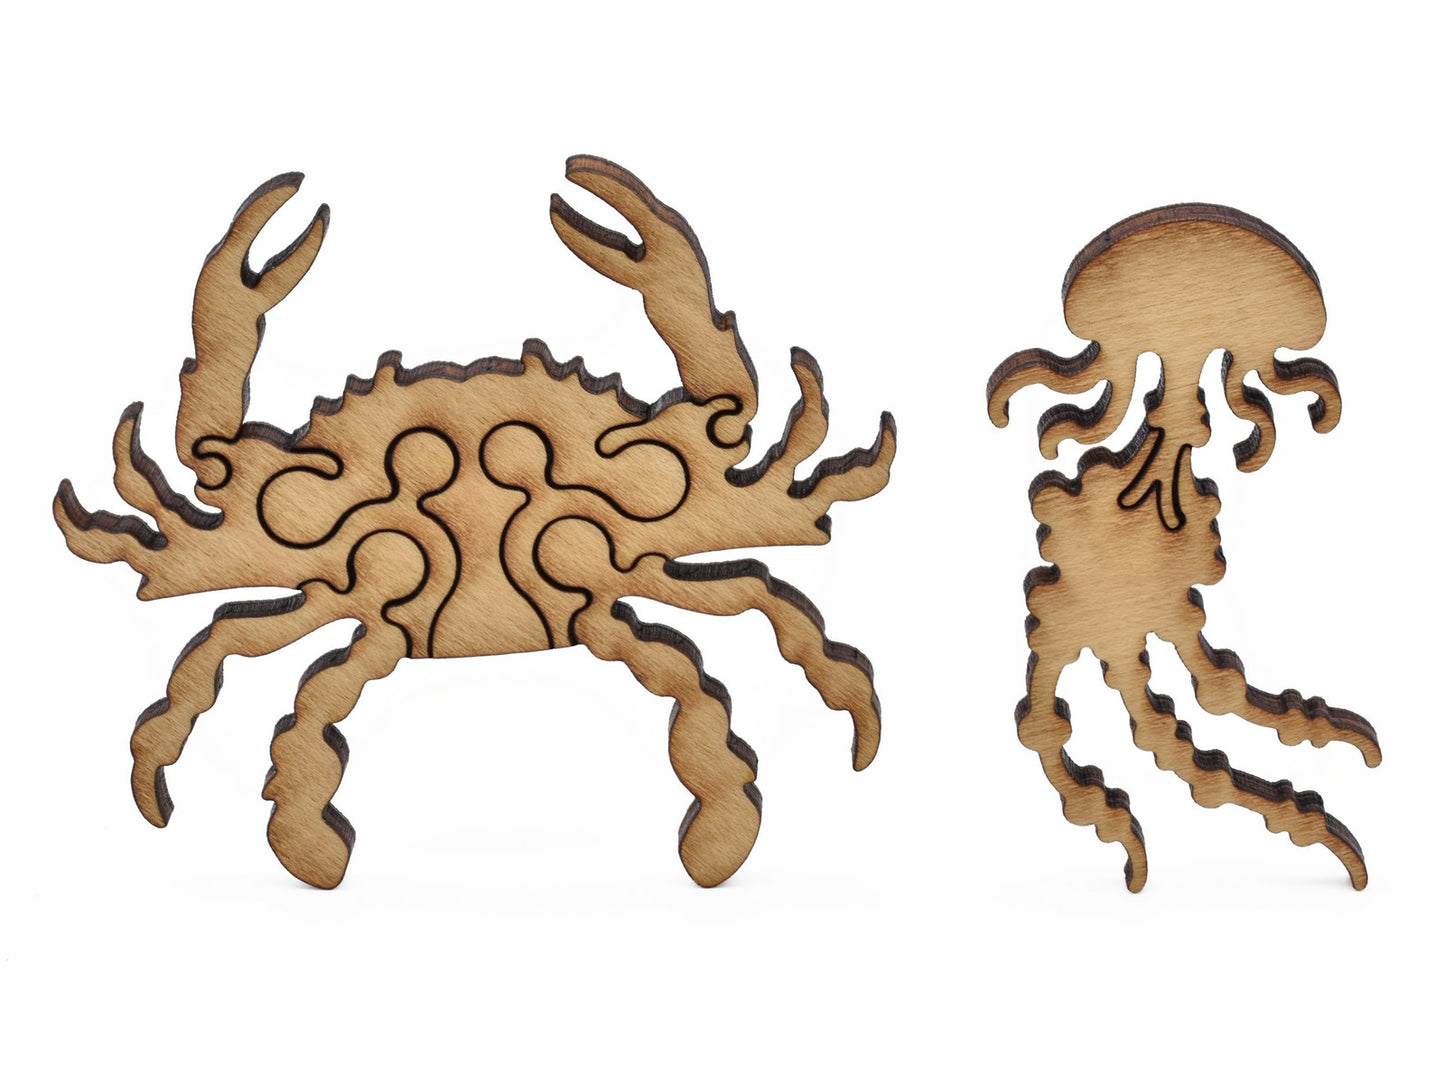 A closeup of pieces showing a crab and a jellyfish.